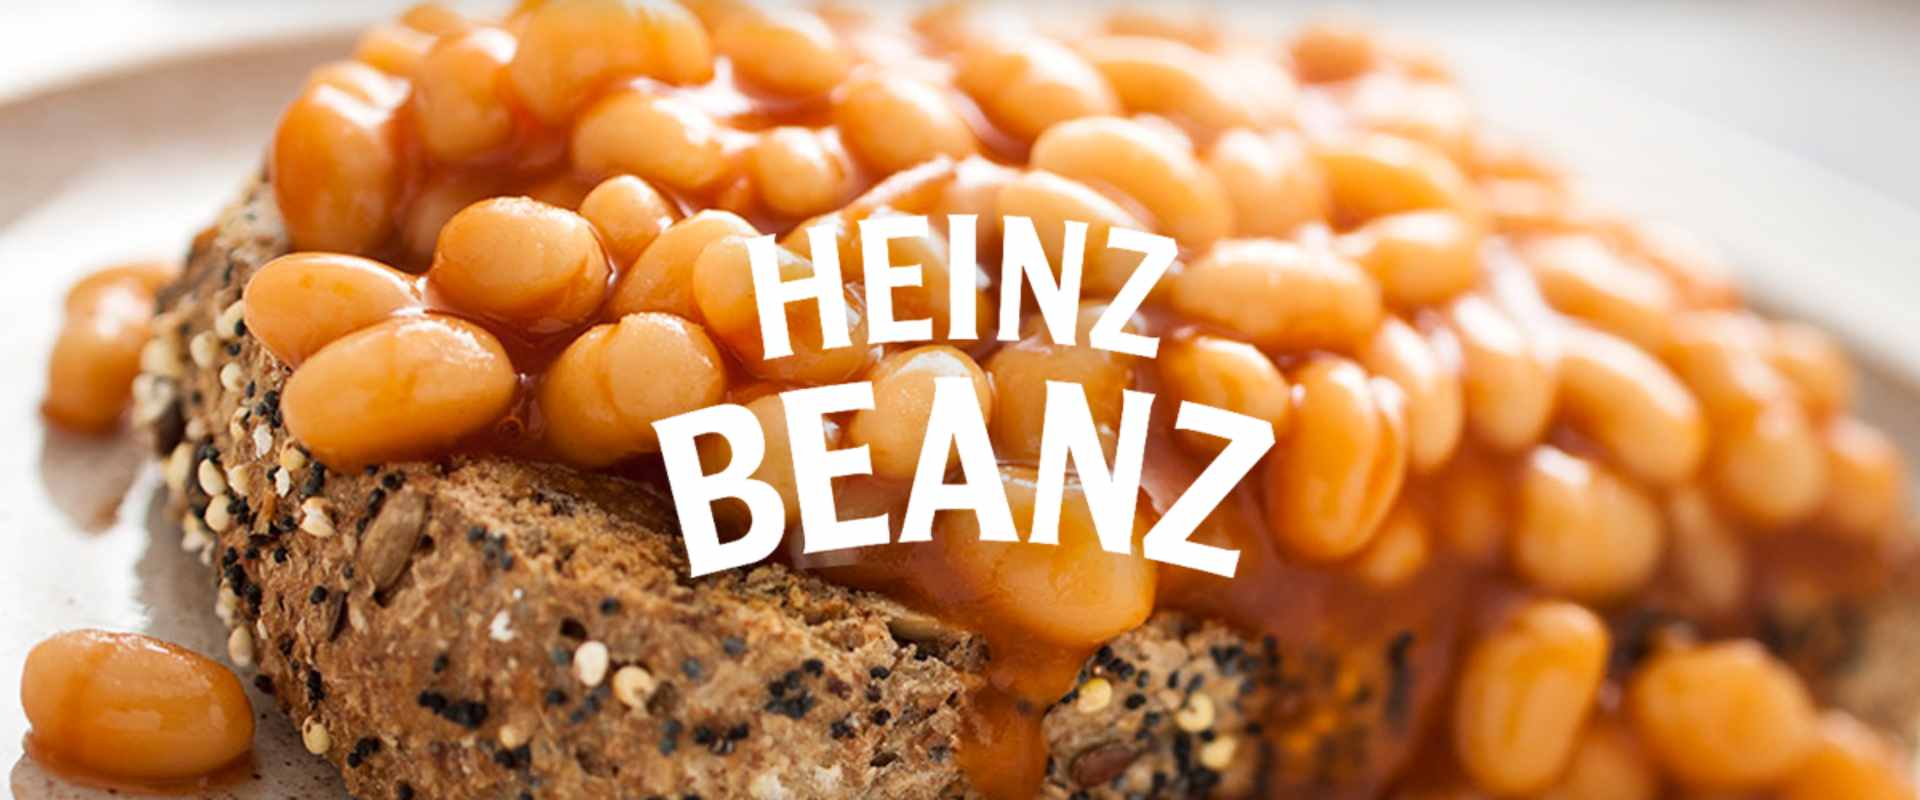 Heinz Beanz | The History of the iconic Brand